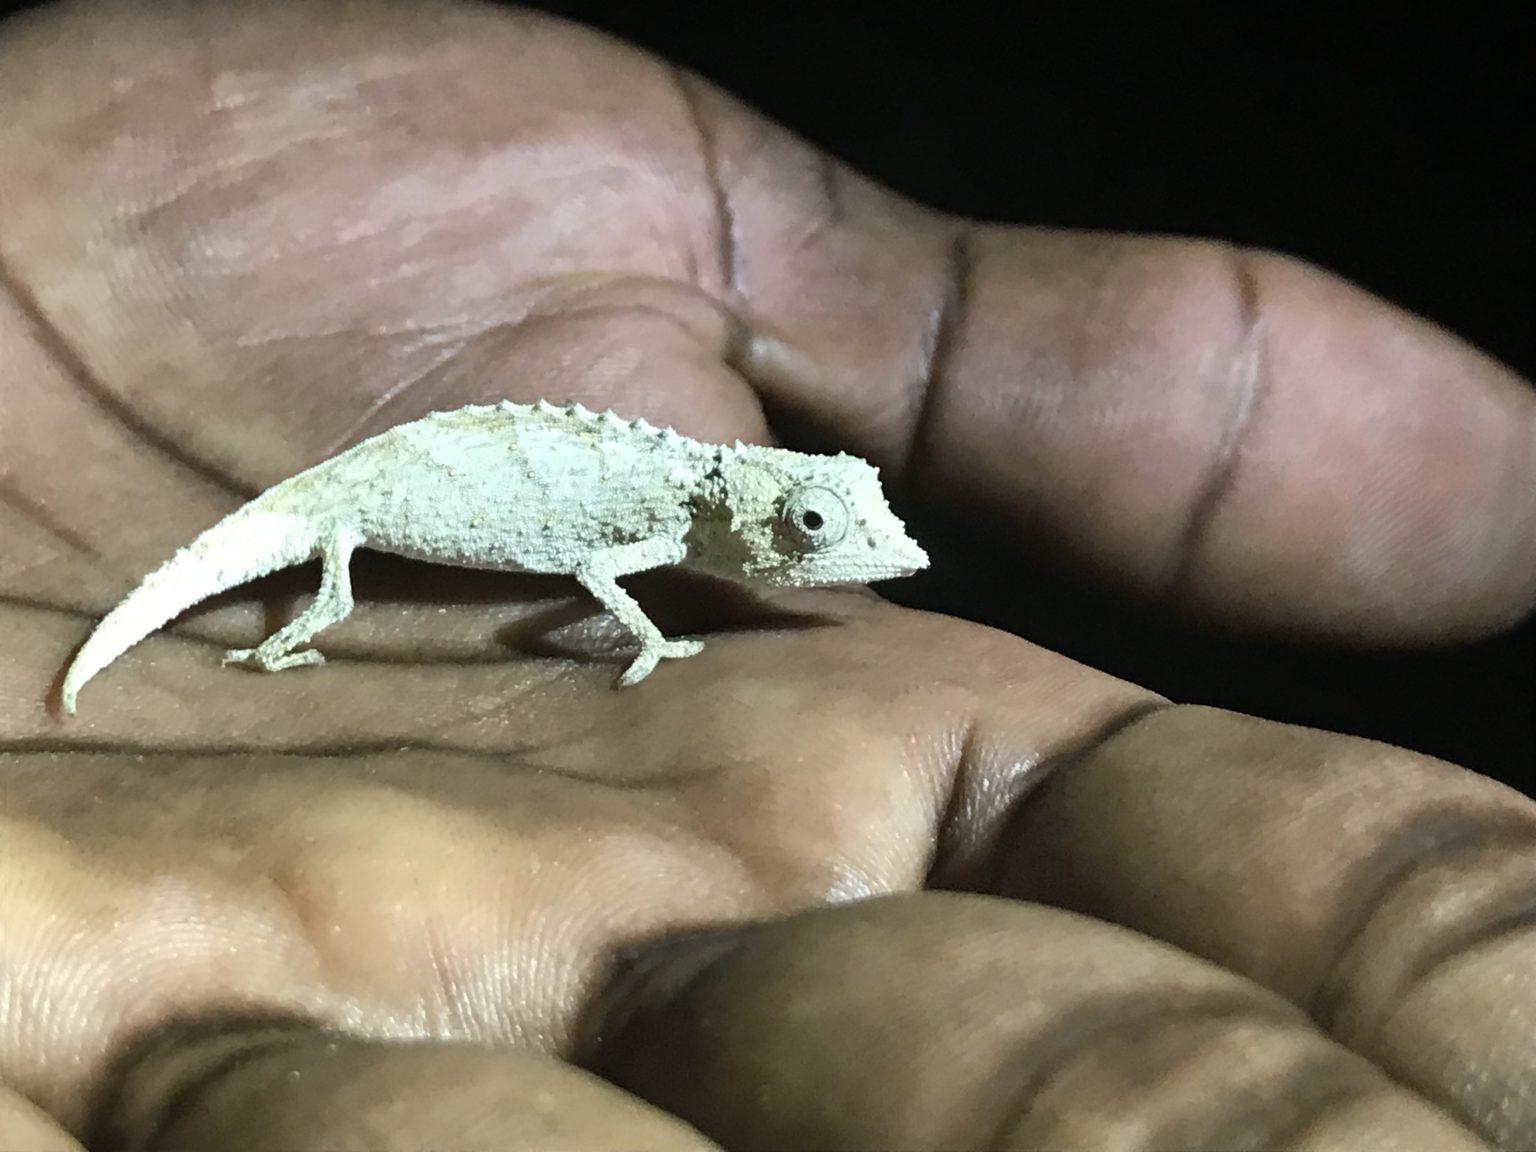 Tiny chameleon in the palm of hand